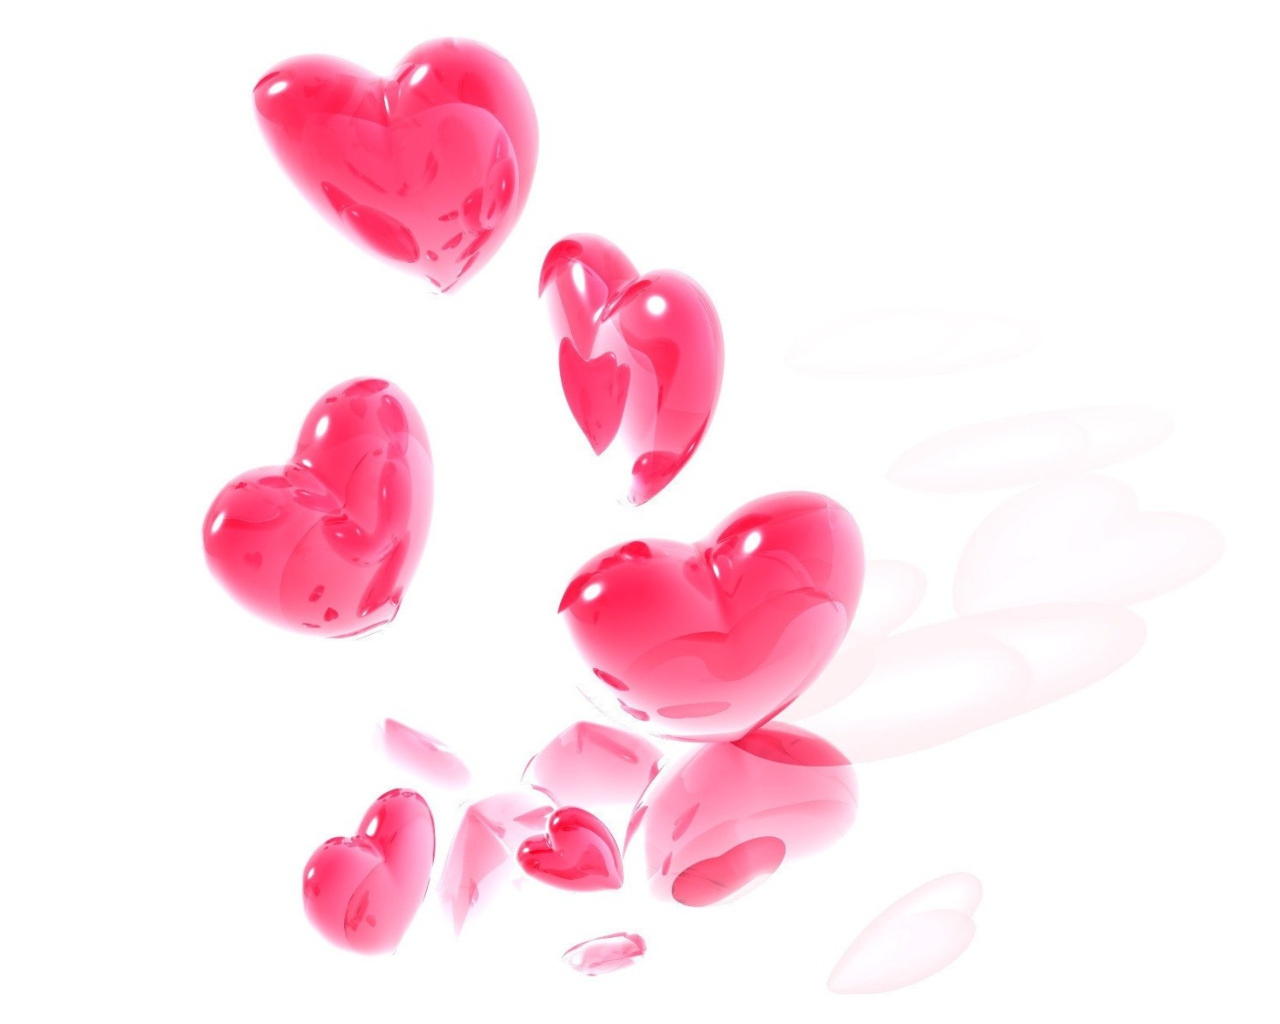 Abstract Pink Hearts On White screenshot #1 1280x1024